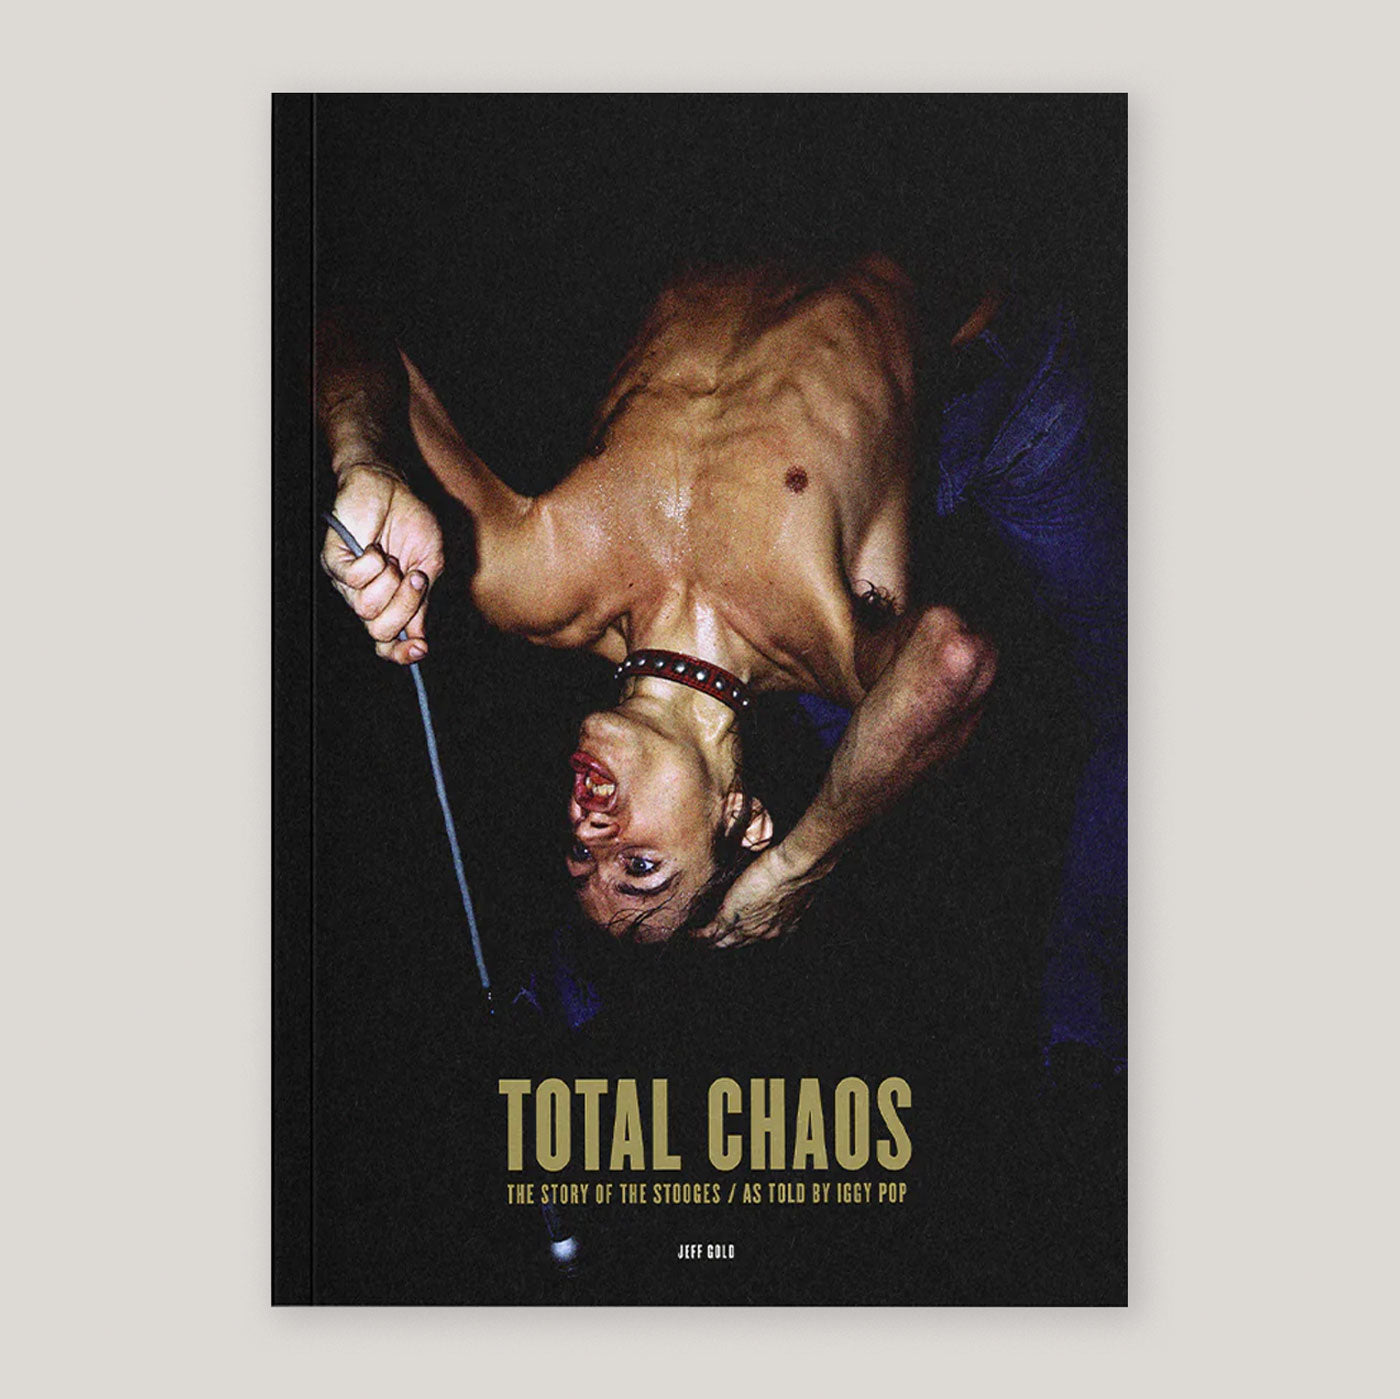 Total Chaos: The Story of the Stooges: The Story of the Stooges As Told by Iggy Pop | Jeff Gold | Colours May Vary 